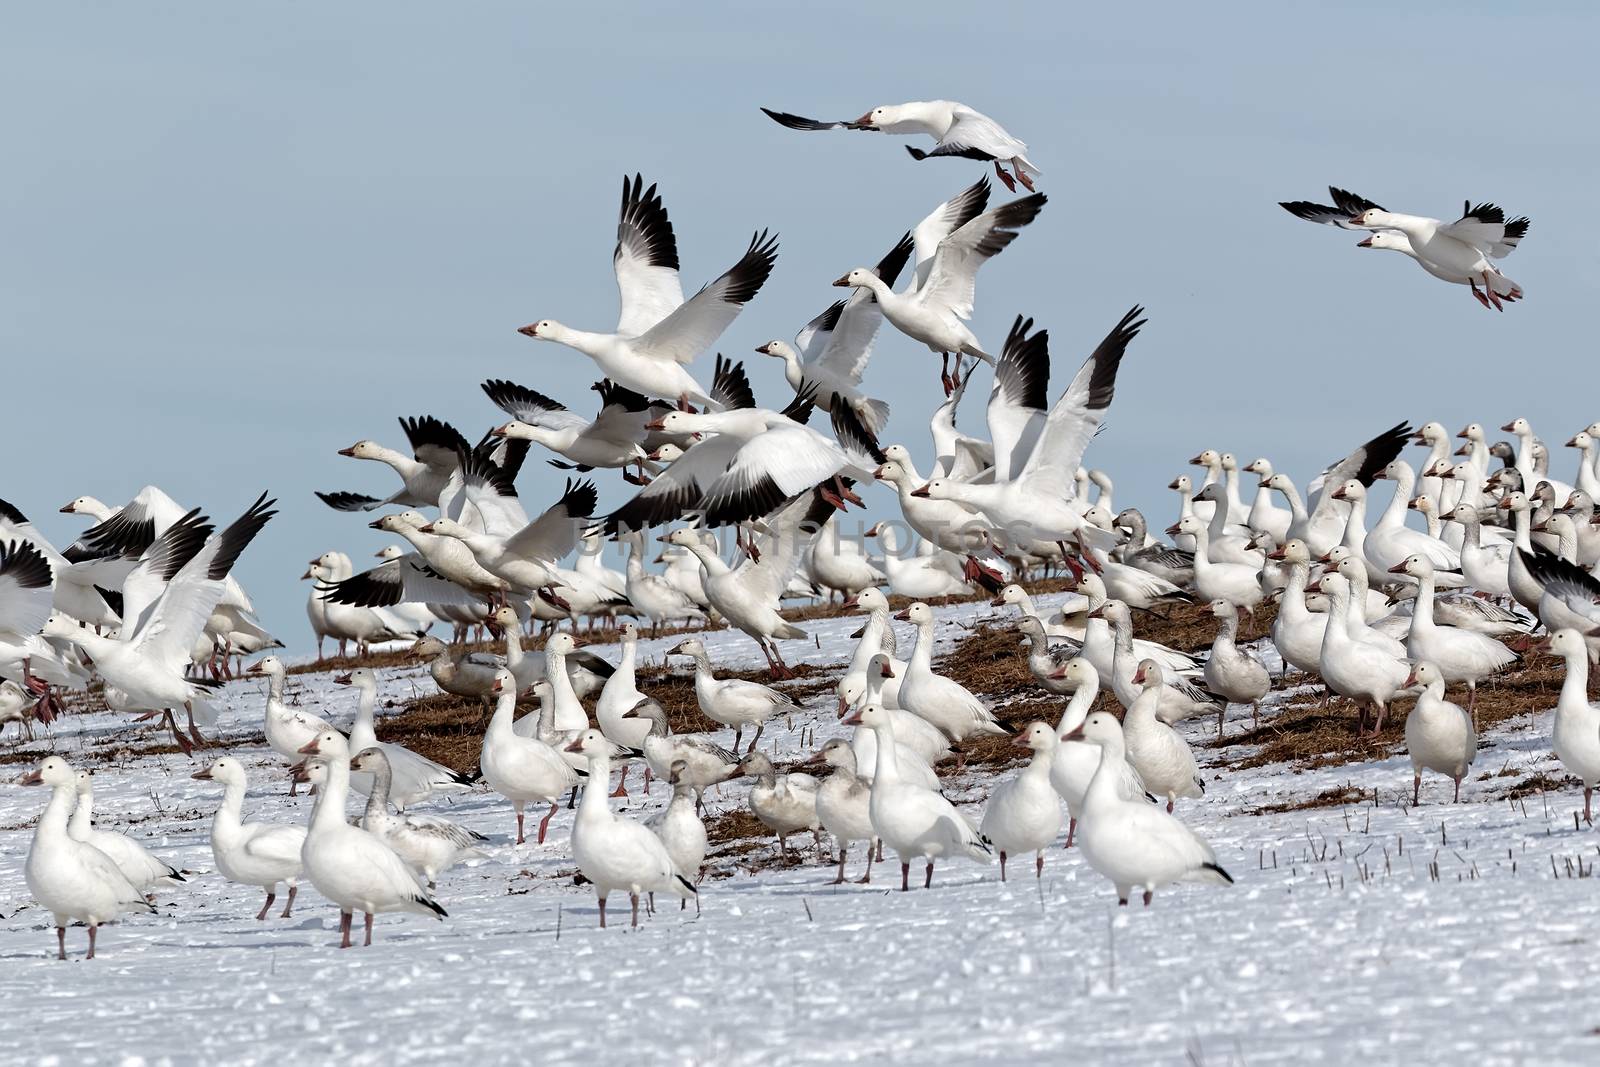 Snow Geese Flying From Snowy Hillside by DelmasLehman